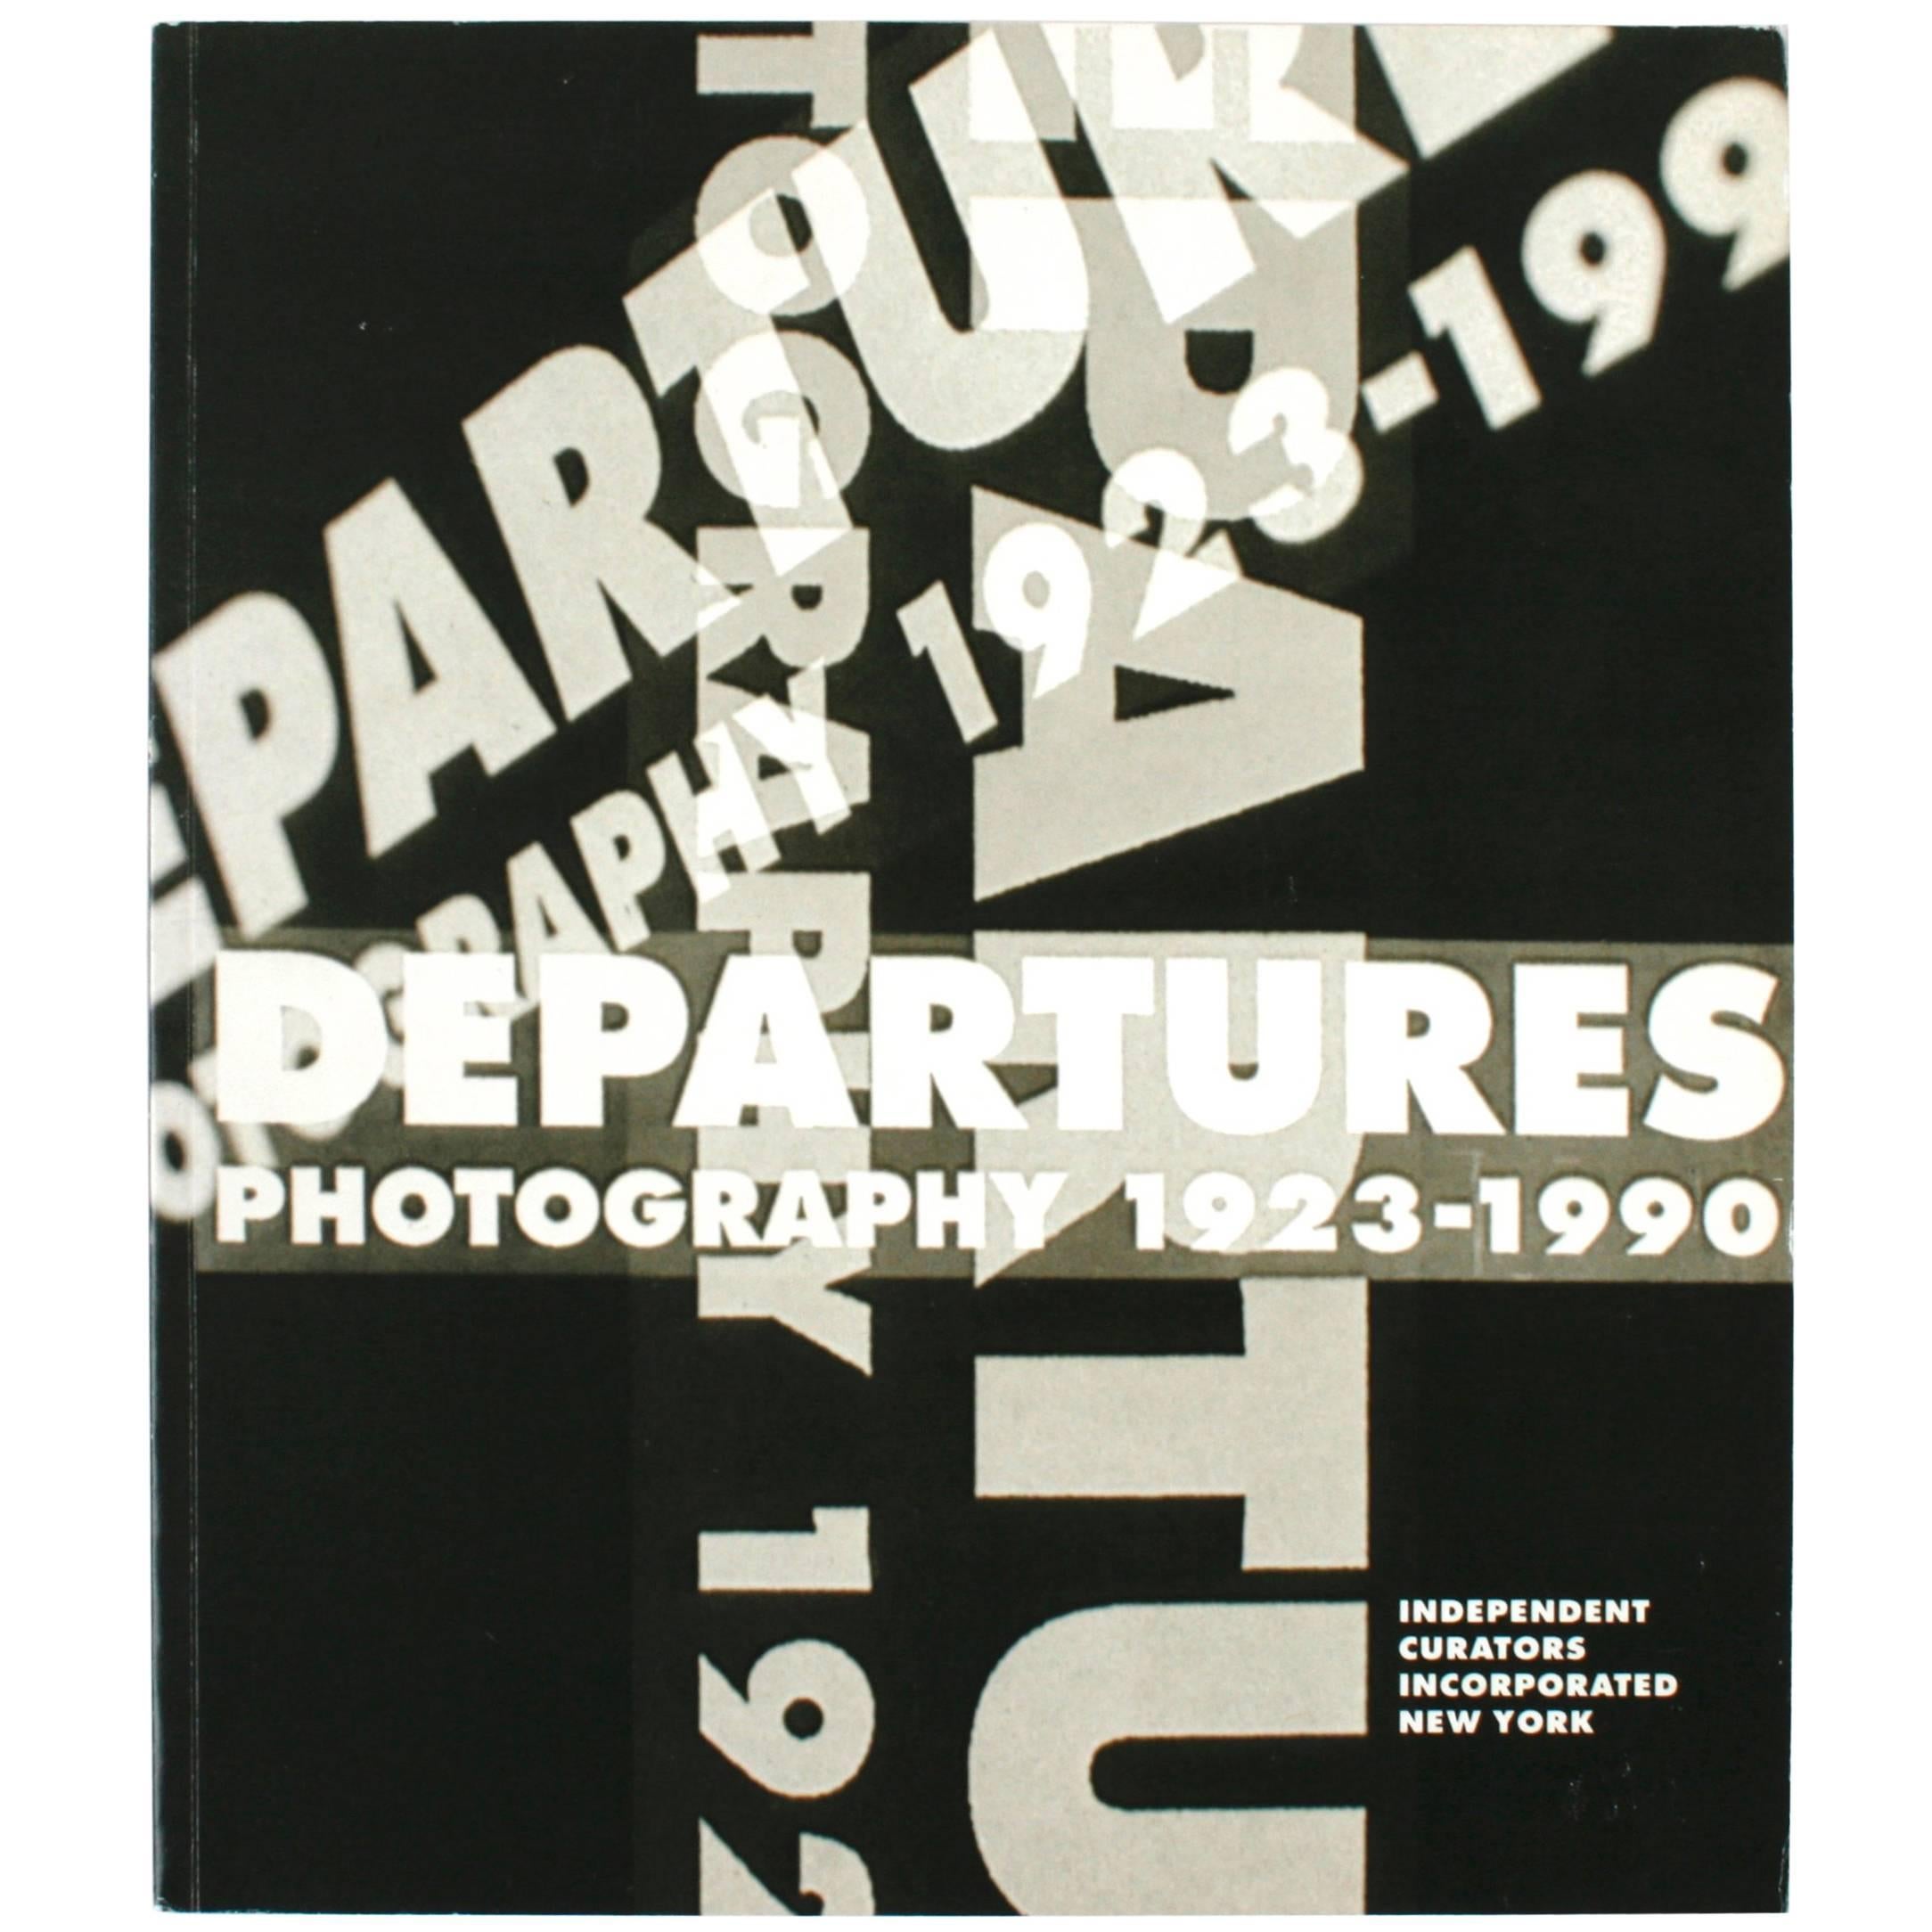 Departures Photography, 1923-1990